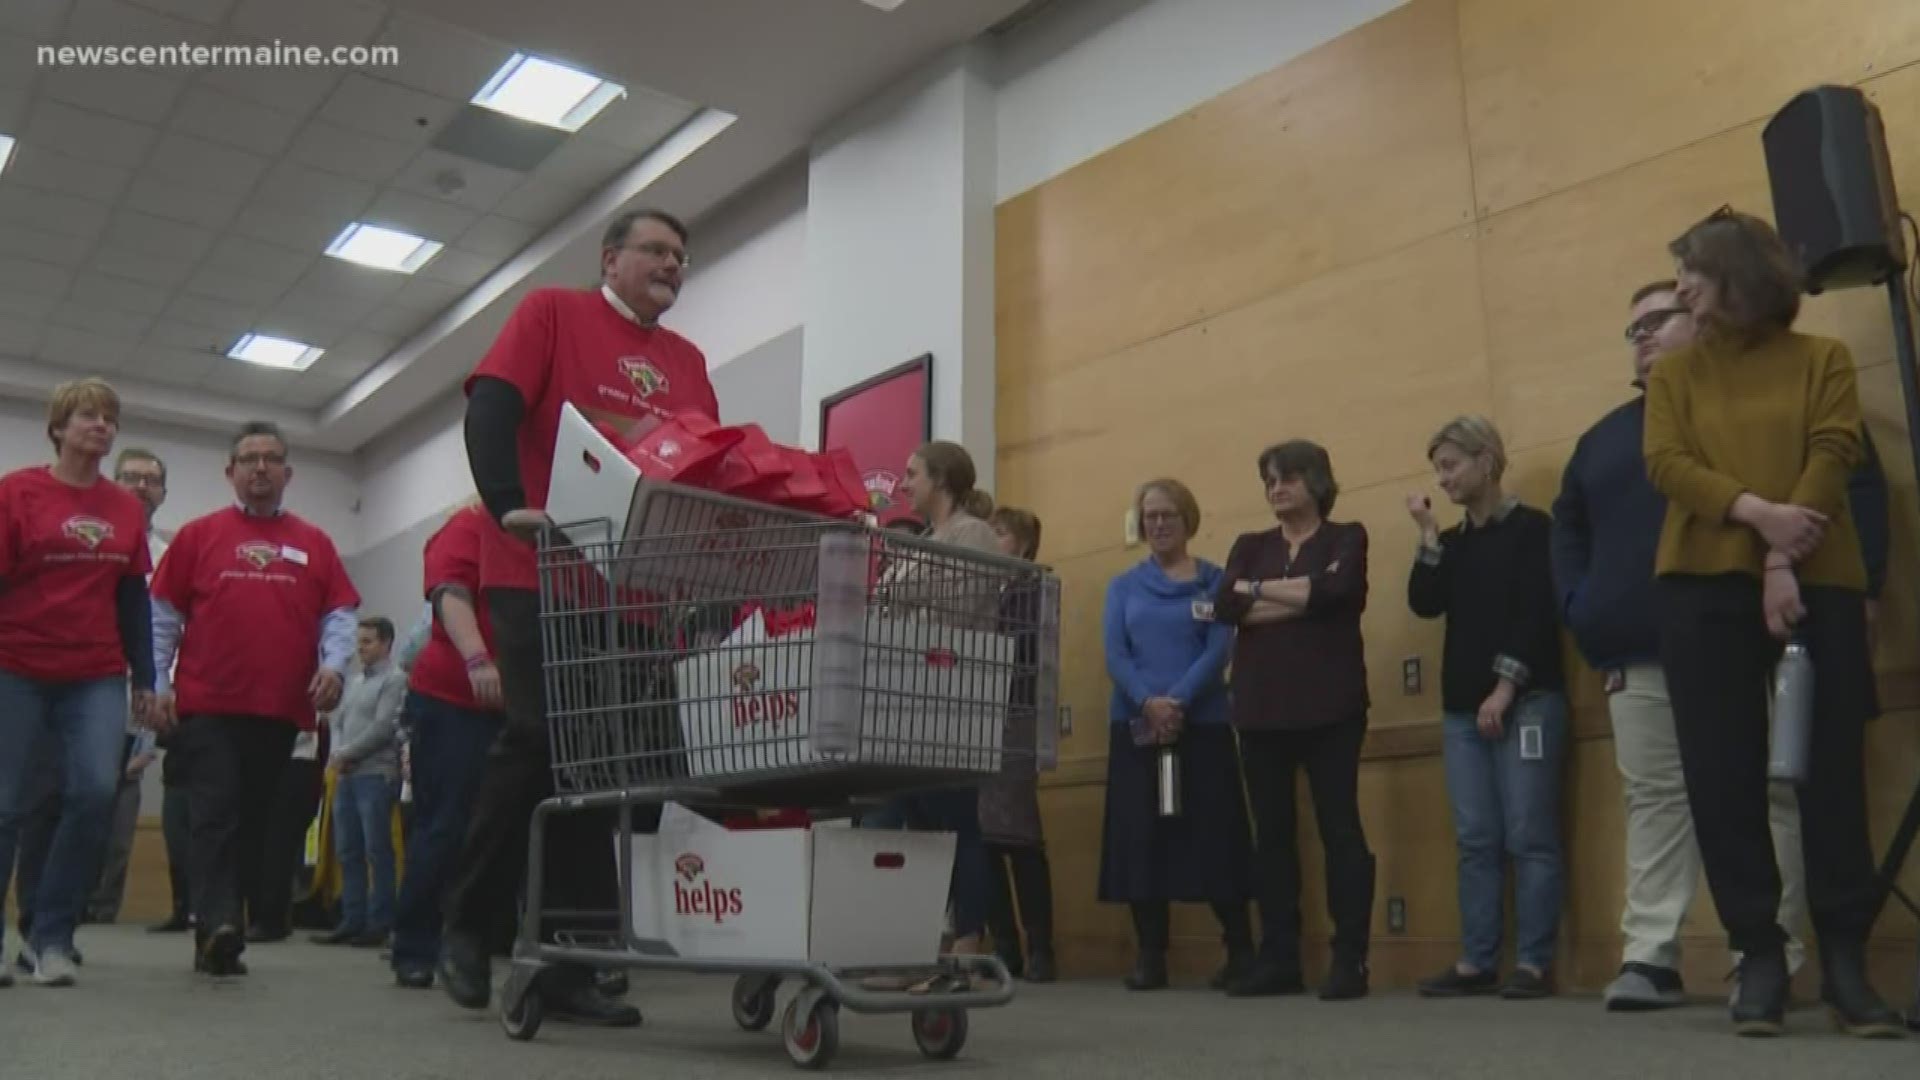 A major donation by Hannaford will help children access healthy food and a lot more.